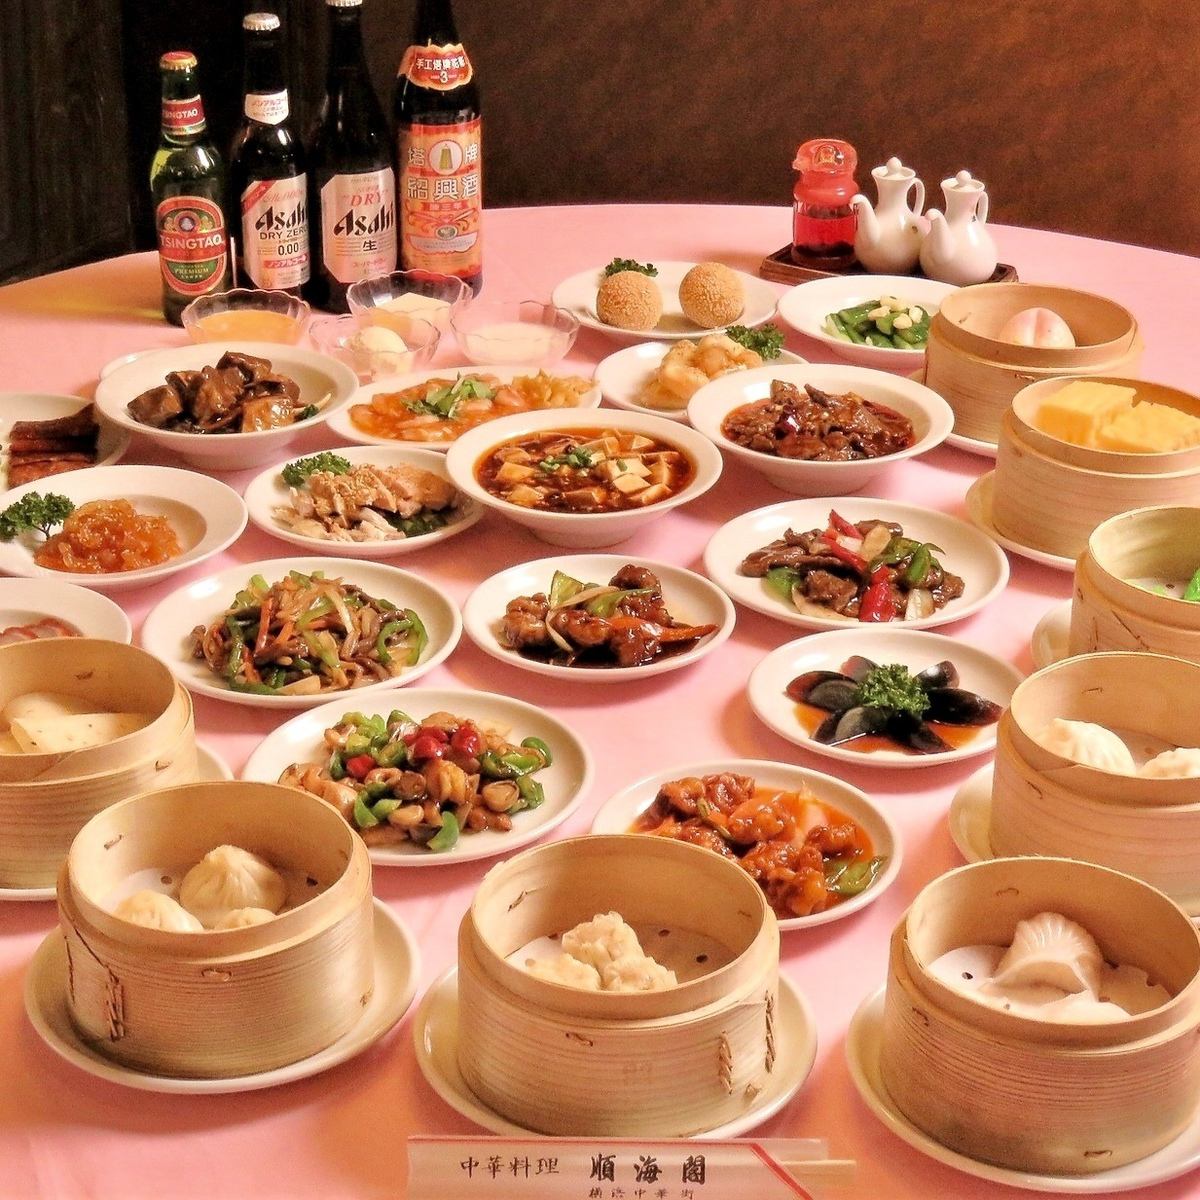 No time limit, all-you-can-eat order style! Luxurious lunch in Chinatown!